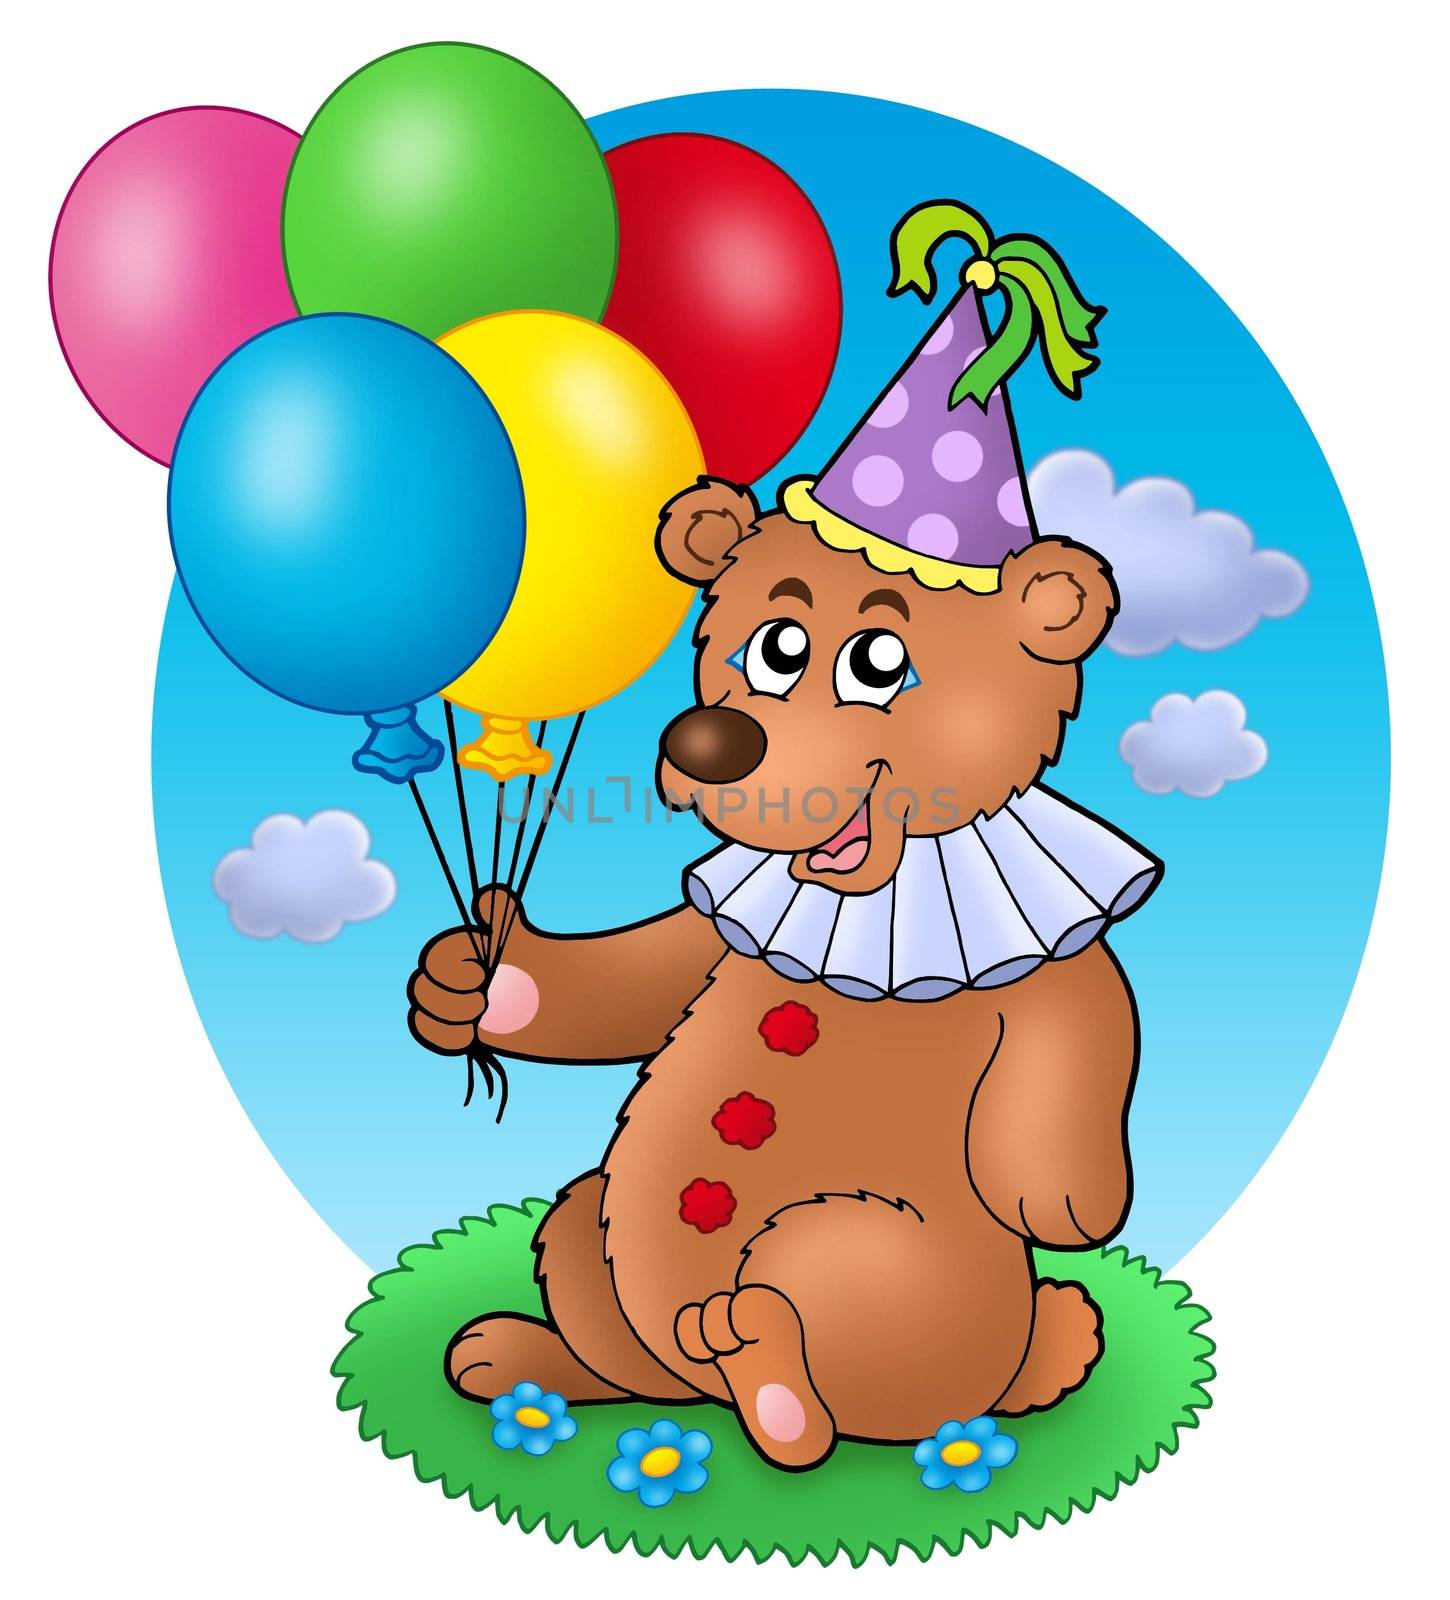 Bear clown with balloons on meadow - color illustration.